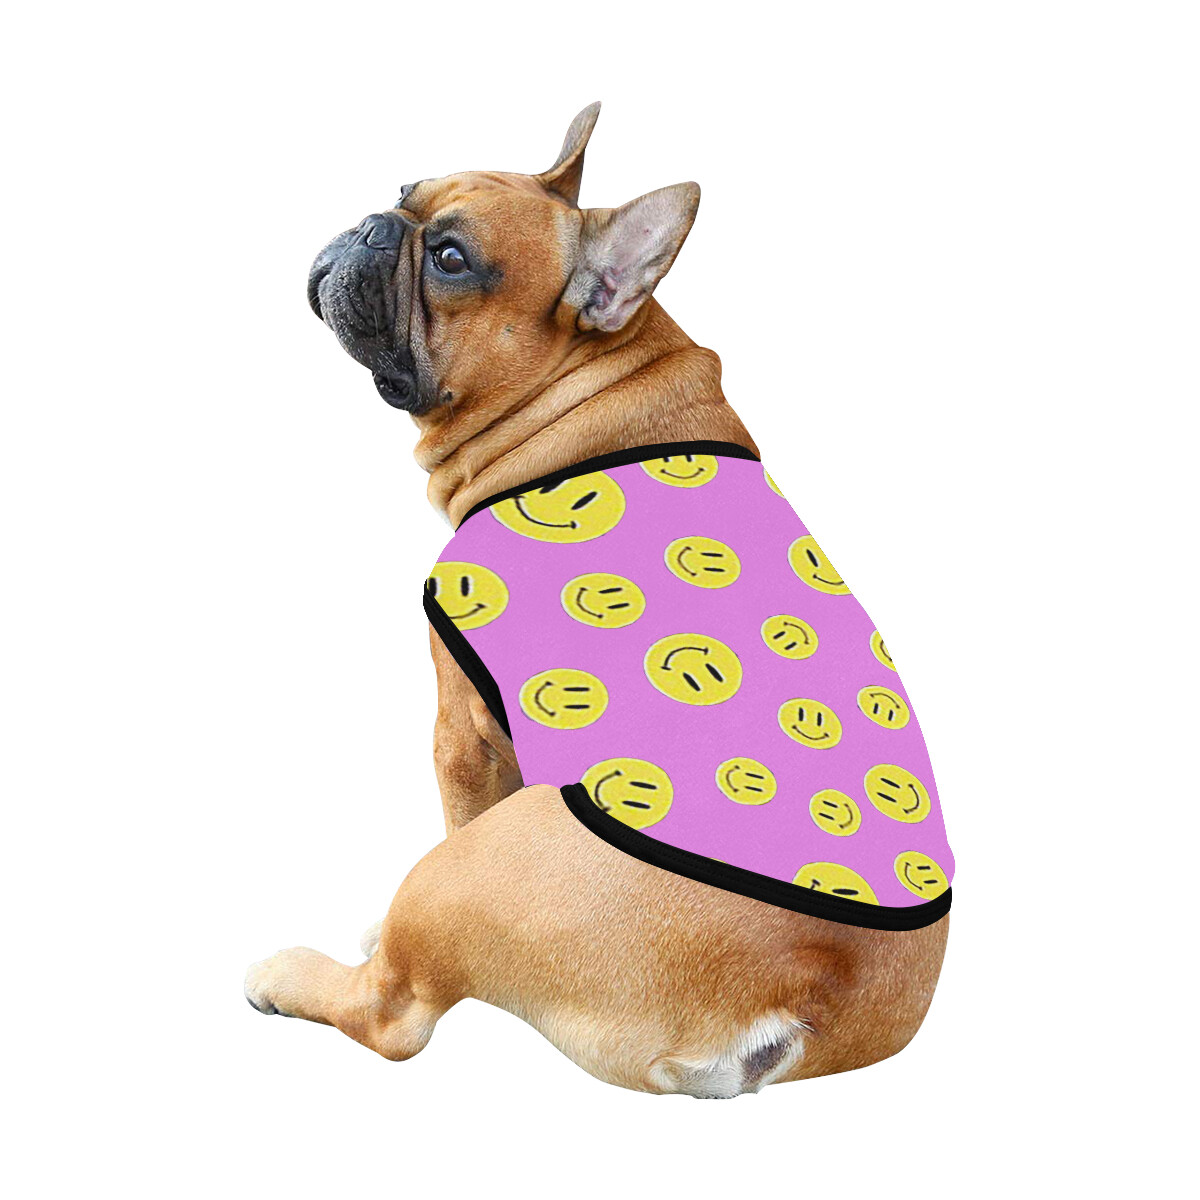 🐕 Happy faces Dog Tank Top, Dog shirt, Dog clothes, Gifts, front back print, 7 sizes XS to 3XL, dog t-shirt, dog t-shirt, dog gift, violet